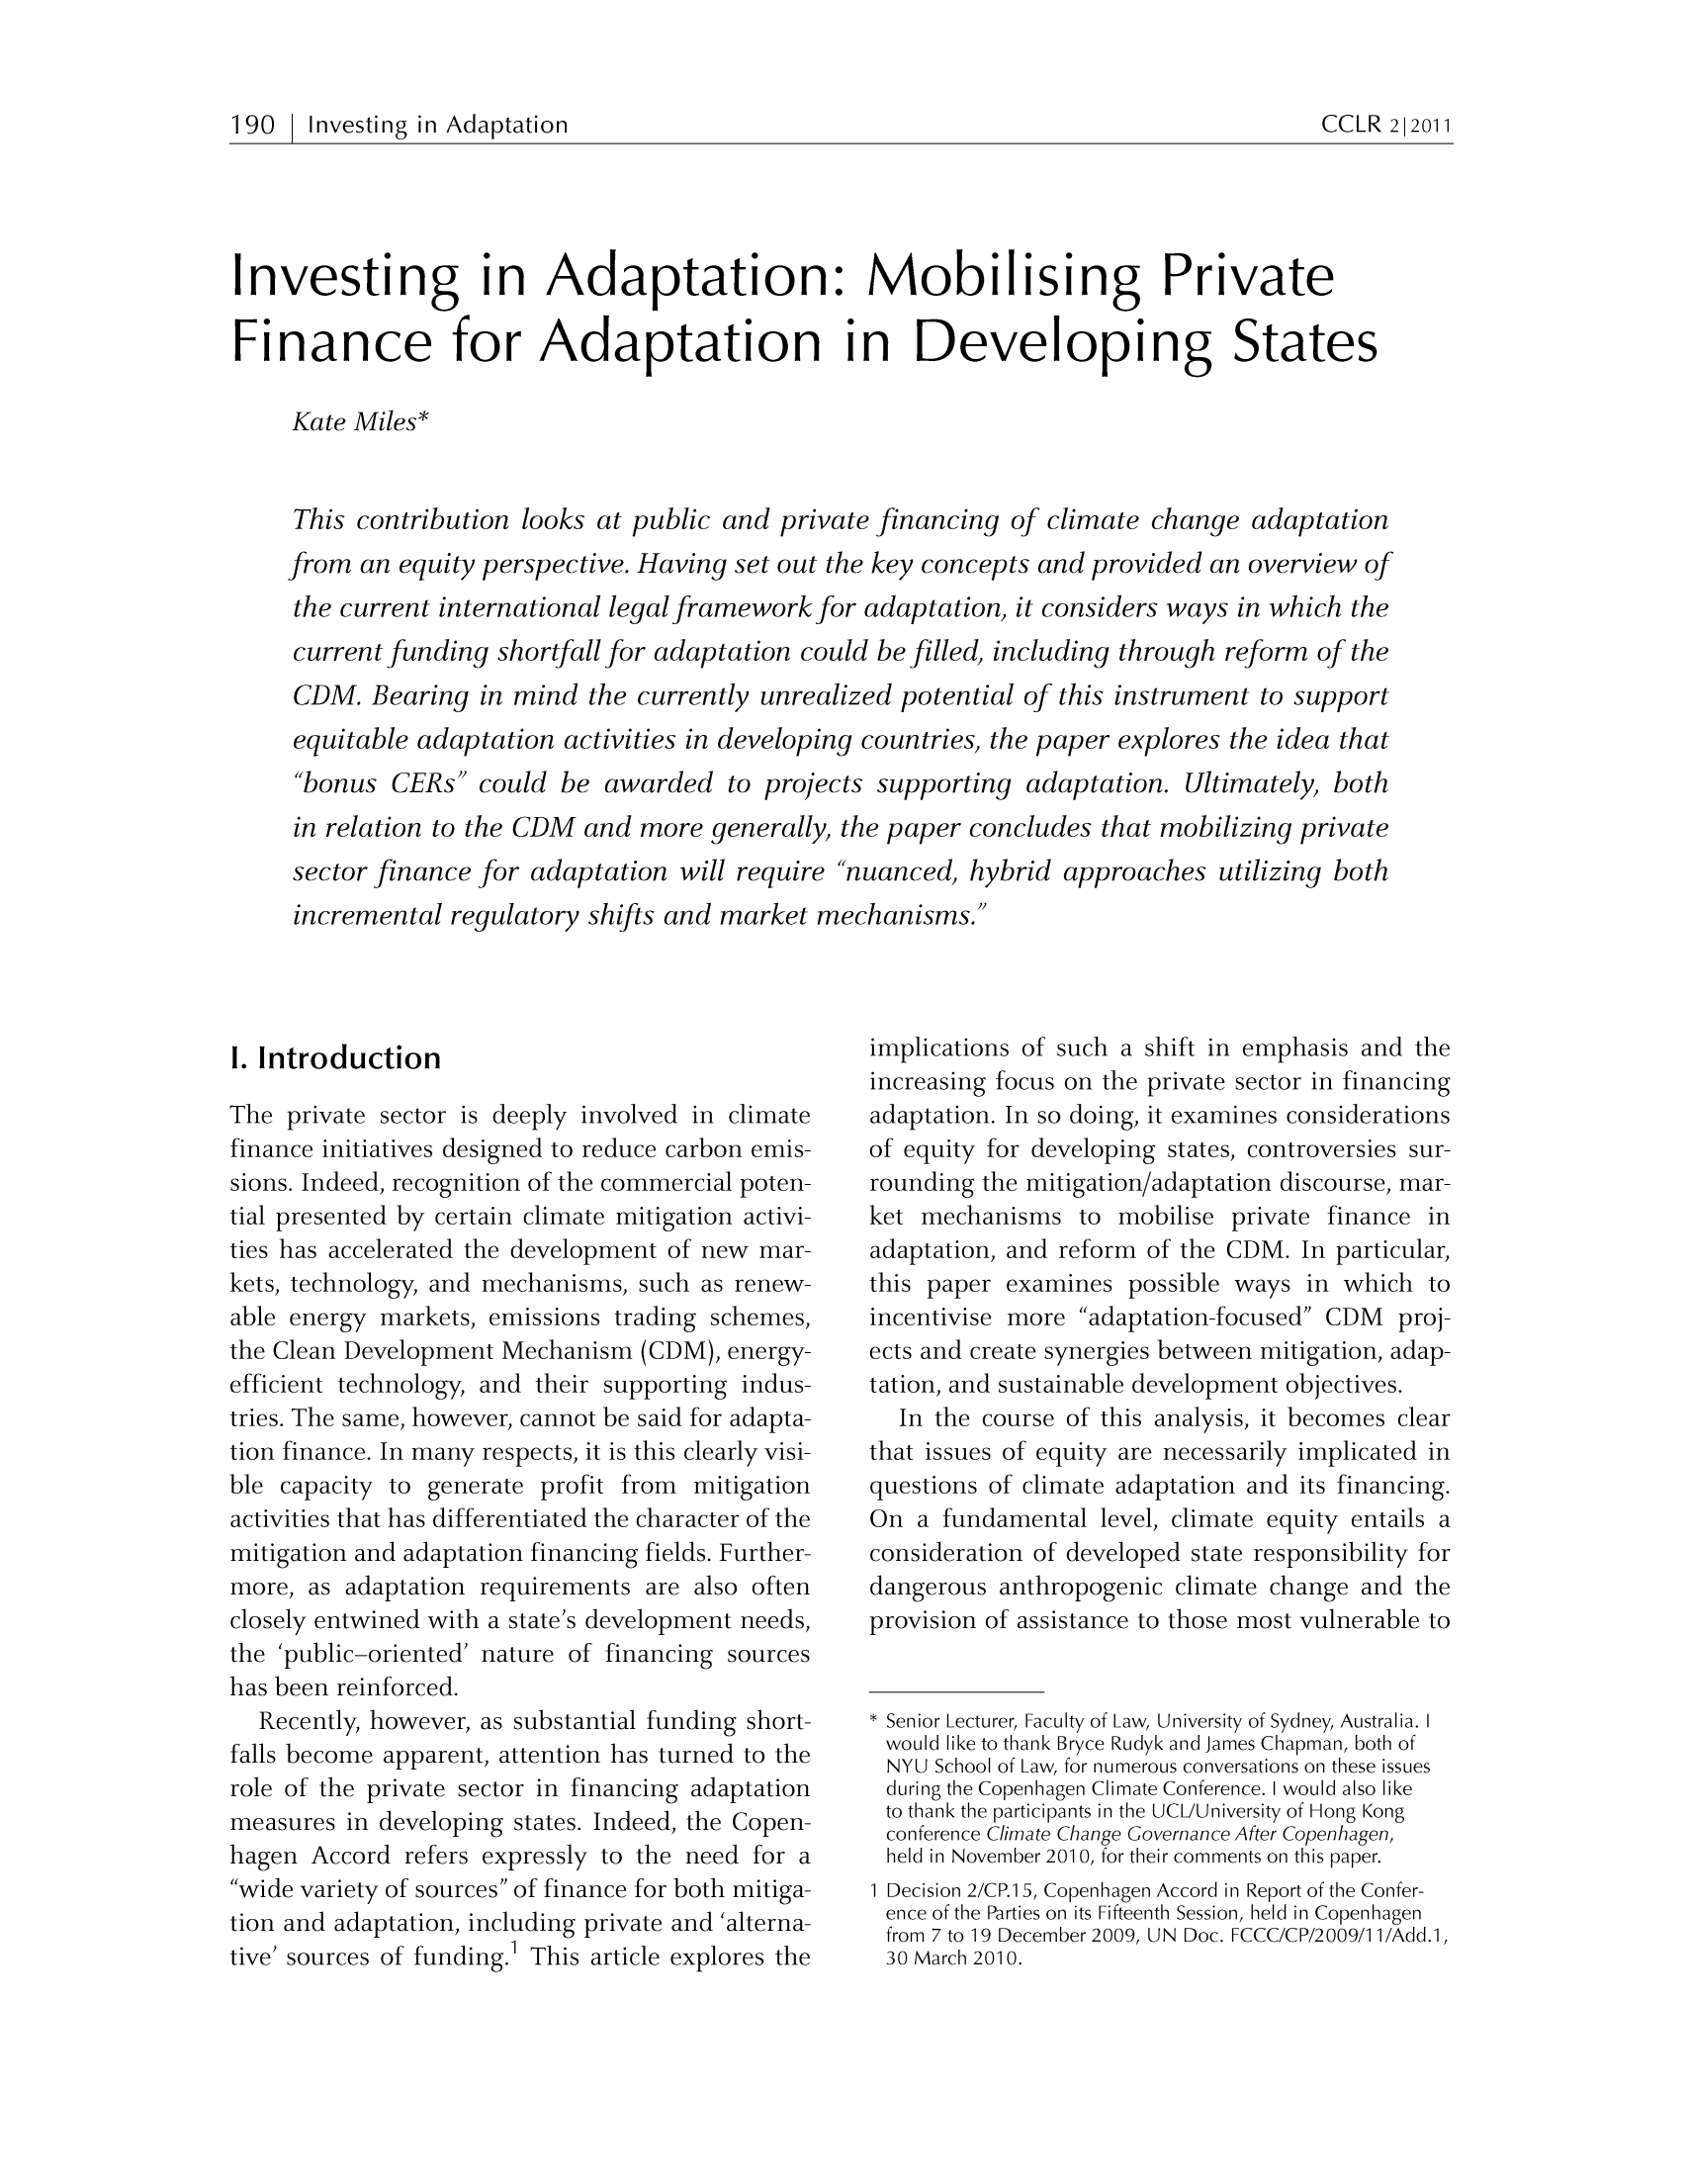 handle is hein.journals/cclr2011 and id is 198 raw text is: 190   Investing in Adaptation                                                            CCLR 2~2011Investing in Adaptation: Mobilising PrivateFinance for Adaptation in Developing StatesKate Miles*This contribution looks at public and private financing of climate change adaptationfrom an equity perspective. Having set out the key concepts and provided an overview ofthe current international legal framework for adaptation, it considers ways in which thecurrent funding shortfall for adaptation could be filled, including through reform of theCDM. Bearing in mind the currently unrealized potential of this instrument to supportequitable adaptation activities in developing countries, the paper explores the idea that'bonus CERs could be awarded to projects supporting adaptation. Ultimately, bothin relation to the CDM and more generally, the paper concludes that mobilizing privatesector finance for adaptation will require 'nuanced, hybrid approaches utilizing bothincremental regulatory shifts and market mechanisms.I. IntroductionThe private sector is deeply involved in climatefinance initiatives designed to reduce carbon emis-sions. Indeed, recognition of the commercial poten-tial presented by certain climate mitigation activi-ties has accelerated the development of new mar-kets, technology, and mechanisms, such as renew-able energy markets, emissions trading schemes,the Clean Development Mechanism (CDM), energy-efficient technology, and their supporting indus-tries. The same, however, cannot be said for adapta-tion finance. In many respects, it is this clearly visi-ble capacity to generate profit from mitigationactivities that has differentiated the character of themitigation and adaptation financing fields. Further-more, as adaptation requirements are also oftenclosely entwined with a state's development needs,the 'public-oriented' nature of financing sourceshas been reinforced.Recently, however, as substantial funding short-falls become apparent, attention has turned to therole of the private sector in financing adaptationmeasures in developing states. Indeed, the Copen-hagen Accord refers expressly to the need for awide variety of sources of finance for both mitiga-tion and adaptation, including private and 'alterna-tive' sources of funding.1 This article explores theimplications of such a shift in emphasis and theincreasing focus on the private sector in financingadaptation. In so doing, it examines considerationsof equity for developing states, controversies sur-rounding the mitigation/adaptation discourse, mar-ket mechanisms to mobilise private finance inadaptation, and reform of the CDM. In particular,this paper examines possible ways in which toincentivise more adaptation-focused CDM proj-ects and create synergies between mitigation, adap-tation, and sustainable development objectives.In the course of this analysis, it becomes clearthat issues of equity are necessarily implicated inquestions of climate adaptation and its financing.On a fundamental level, climate equity entails aconsideration of developed state responsibility fordangerous anthropogenic climate change and theprovision of assistance to those most vulnerable toSenior Lecturer, Faculty of Law, University of Sydney, Australia. Iwould like to thank Bryce Rudyk and James Chapman, both ofNYU School of Law, for numerous conversations on these issuesduring the Copenhagen Climate Conference. I would also liketo thank the participants in the UCL/University of Hong Kongconference Climate Change Governance After Copenhagen,held in November 2010, for their comments on this paper.1 Decision 2/CP.15, Copenhagen Accord in Report of the Confer-ence of the Parties on its Fifteenth Session, held in Copenhagenfrom 7 to 19 December 2009, UN Doc. FCCC/CP/2009/1 l/Add.i,30 March 2010.CCLR 212011190 ] I nvesti ngin Adaptation